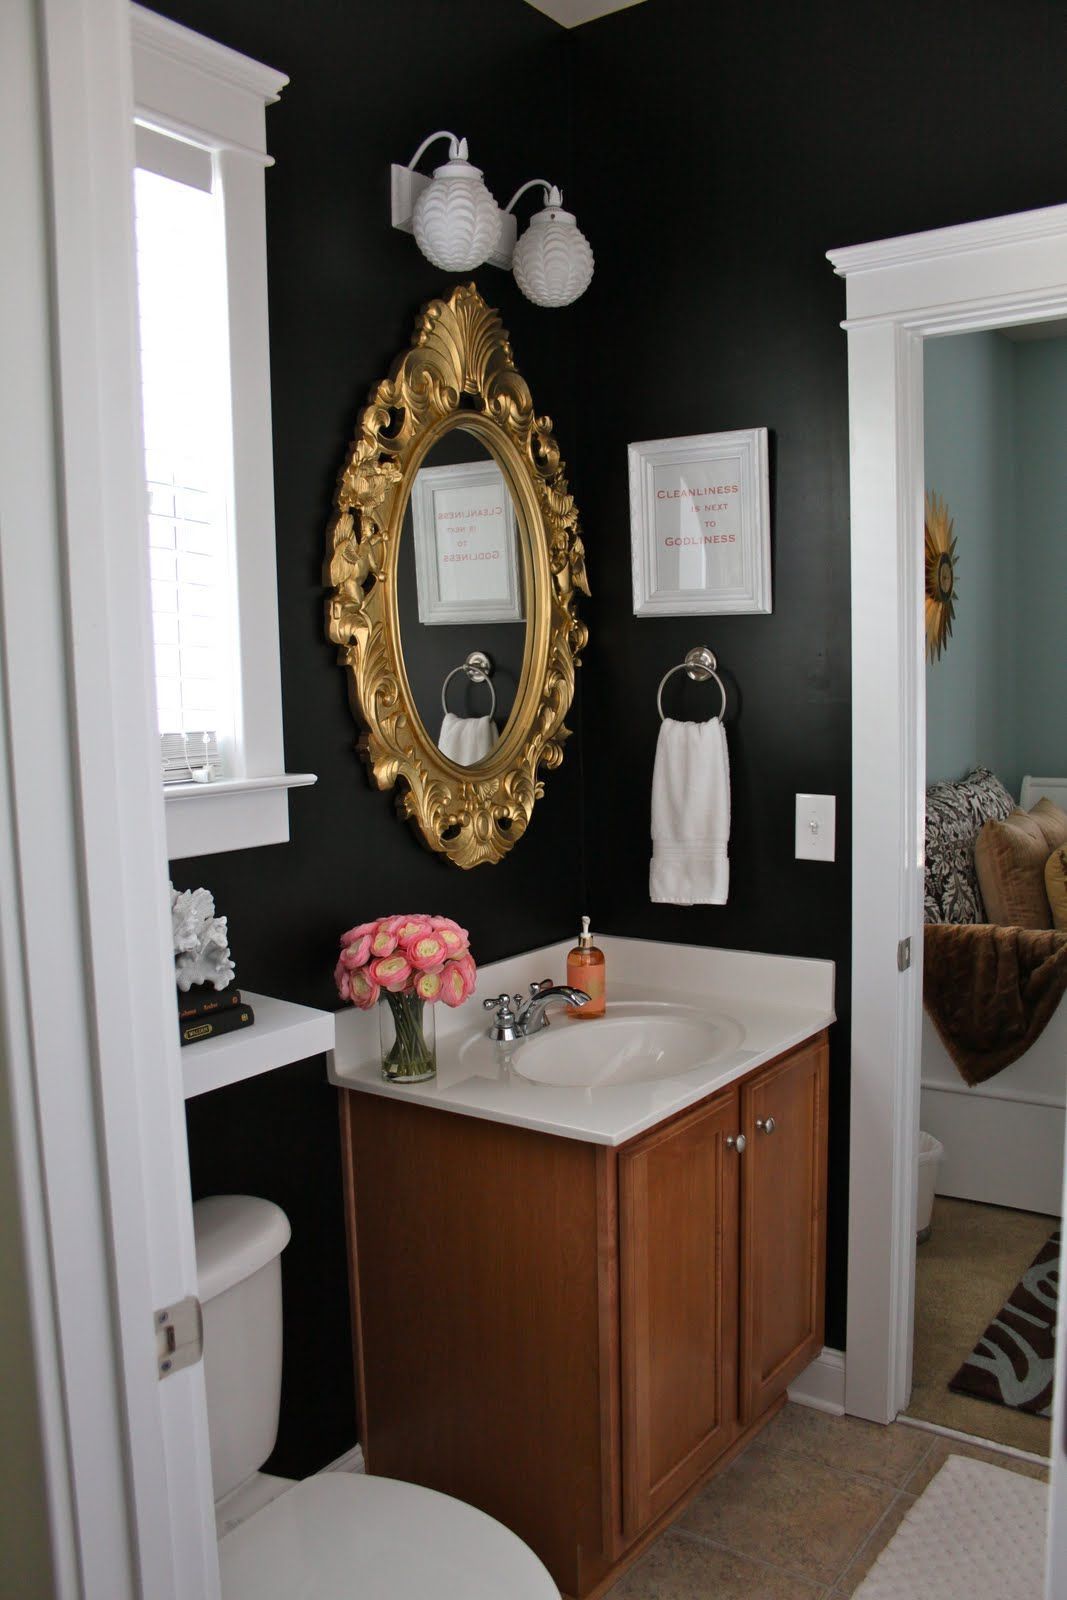 Black walls in the bathroom with gold framed mirror